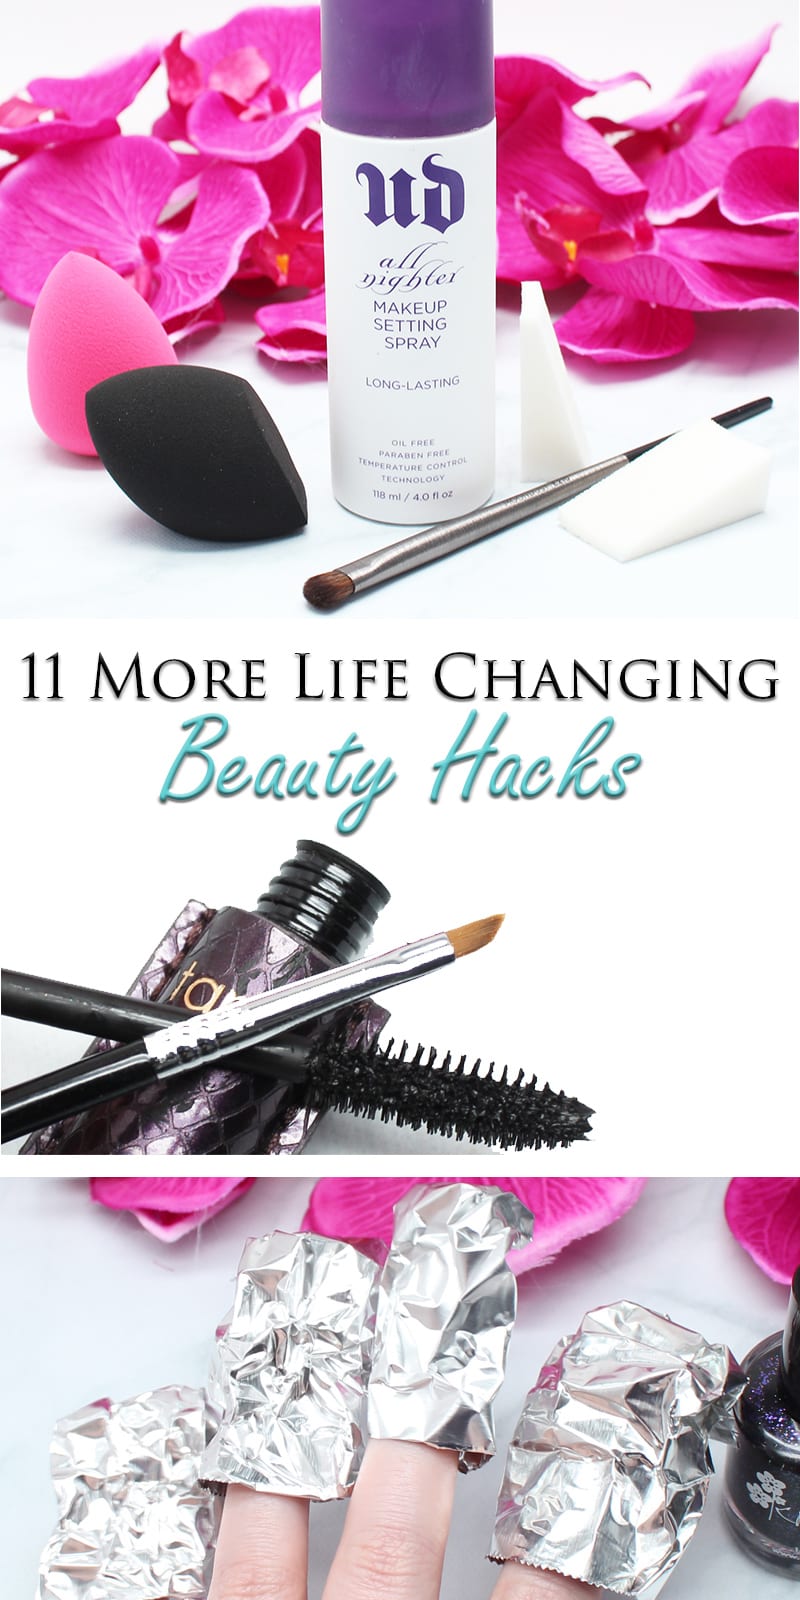 More Life Changing Beauty Hacks